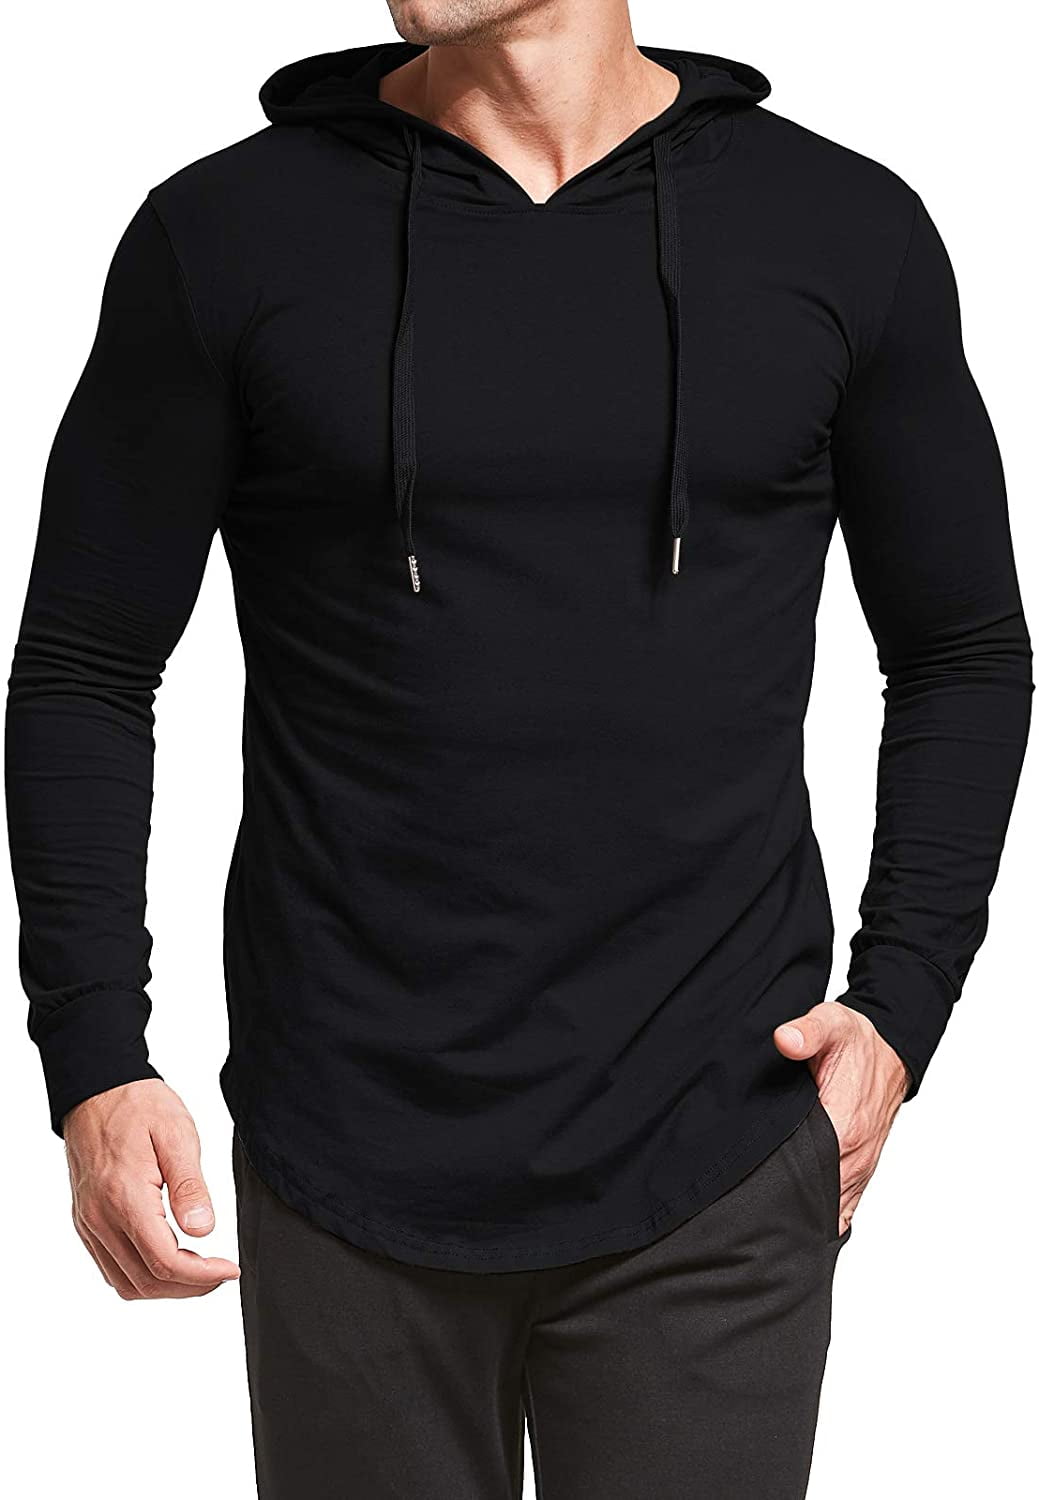 AIYINO Men's S-5X Long/Short Sleeve Fashion Athletic Hoodies Workout Sweatshirt Hip Hop Pullover Hooded 